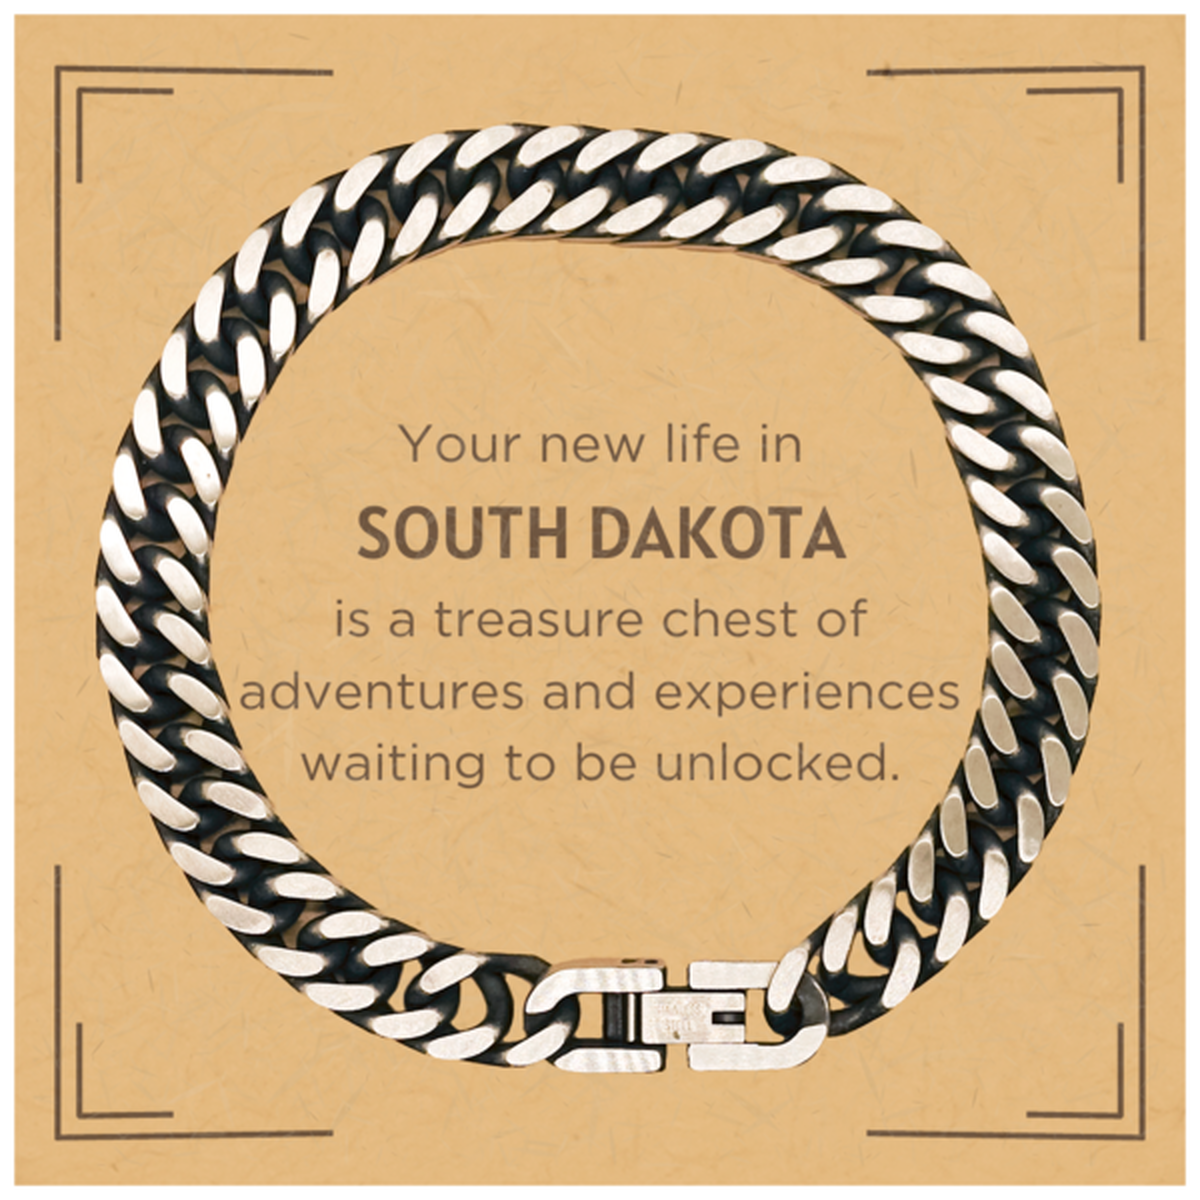 Moving to South Dakota Gifts, Your new life in South Dakota, Long Distance South Dakota Christmas Cuban Link Chain Bracelet For Men, Women, Friends, Coworkers